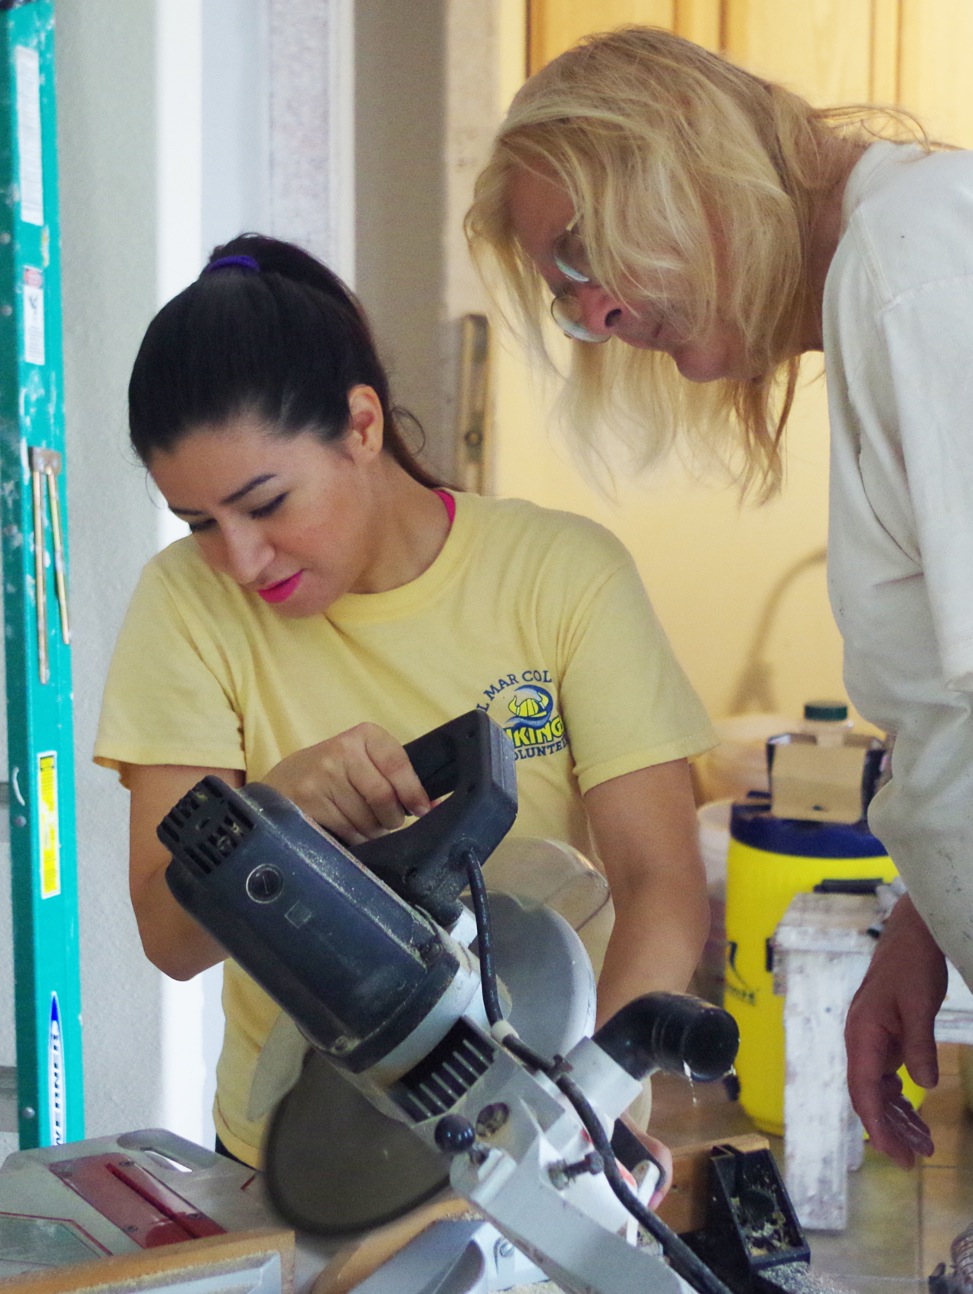 Erica Funes (left) gets help from Mari Randolph on how to properly use a miter saw on door trim pieces while helping build a Habitat for Humanity house.